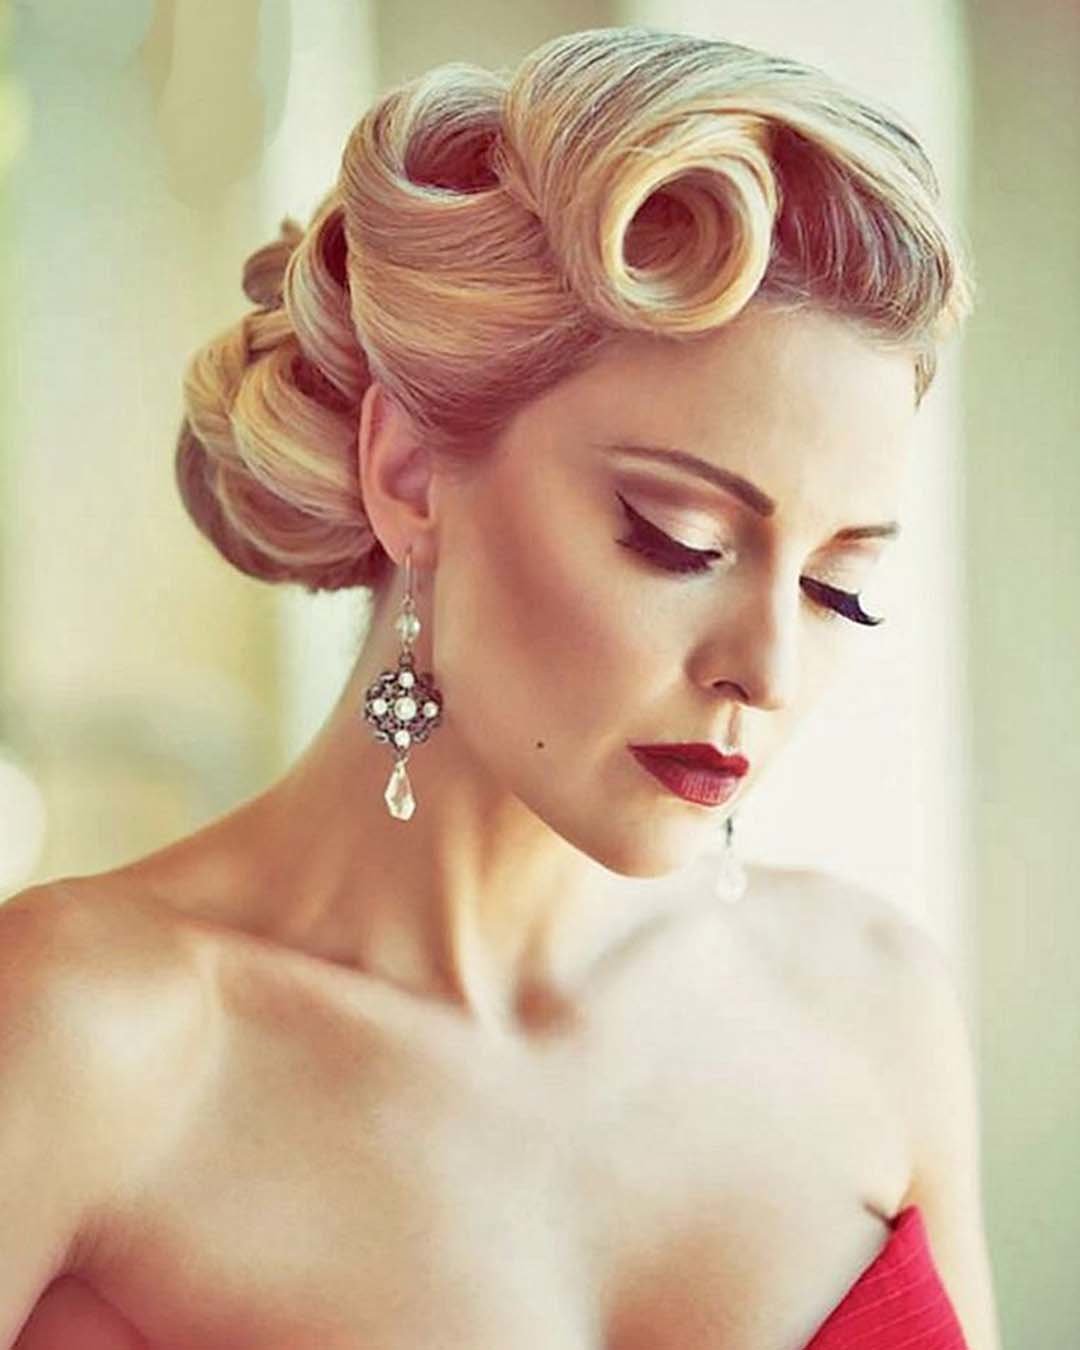 vintage wedding hairstyles low updo with curly rolls robert coppa photography